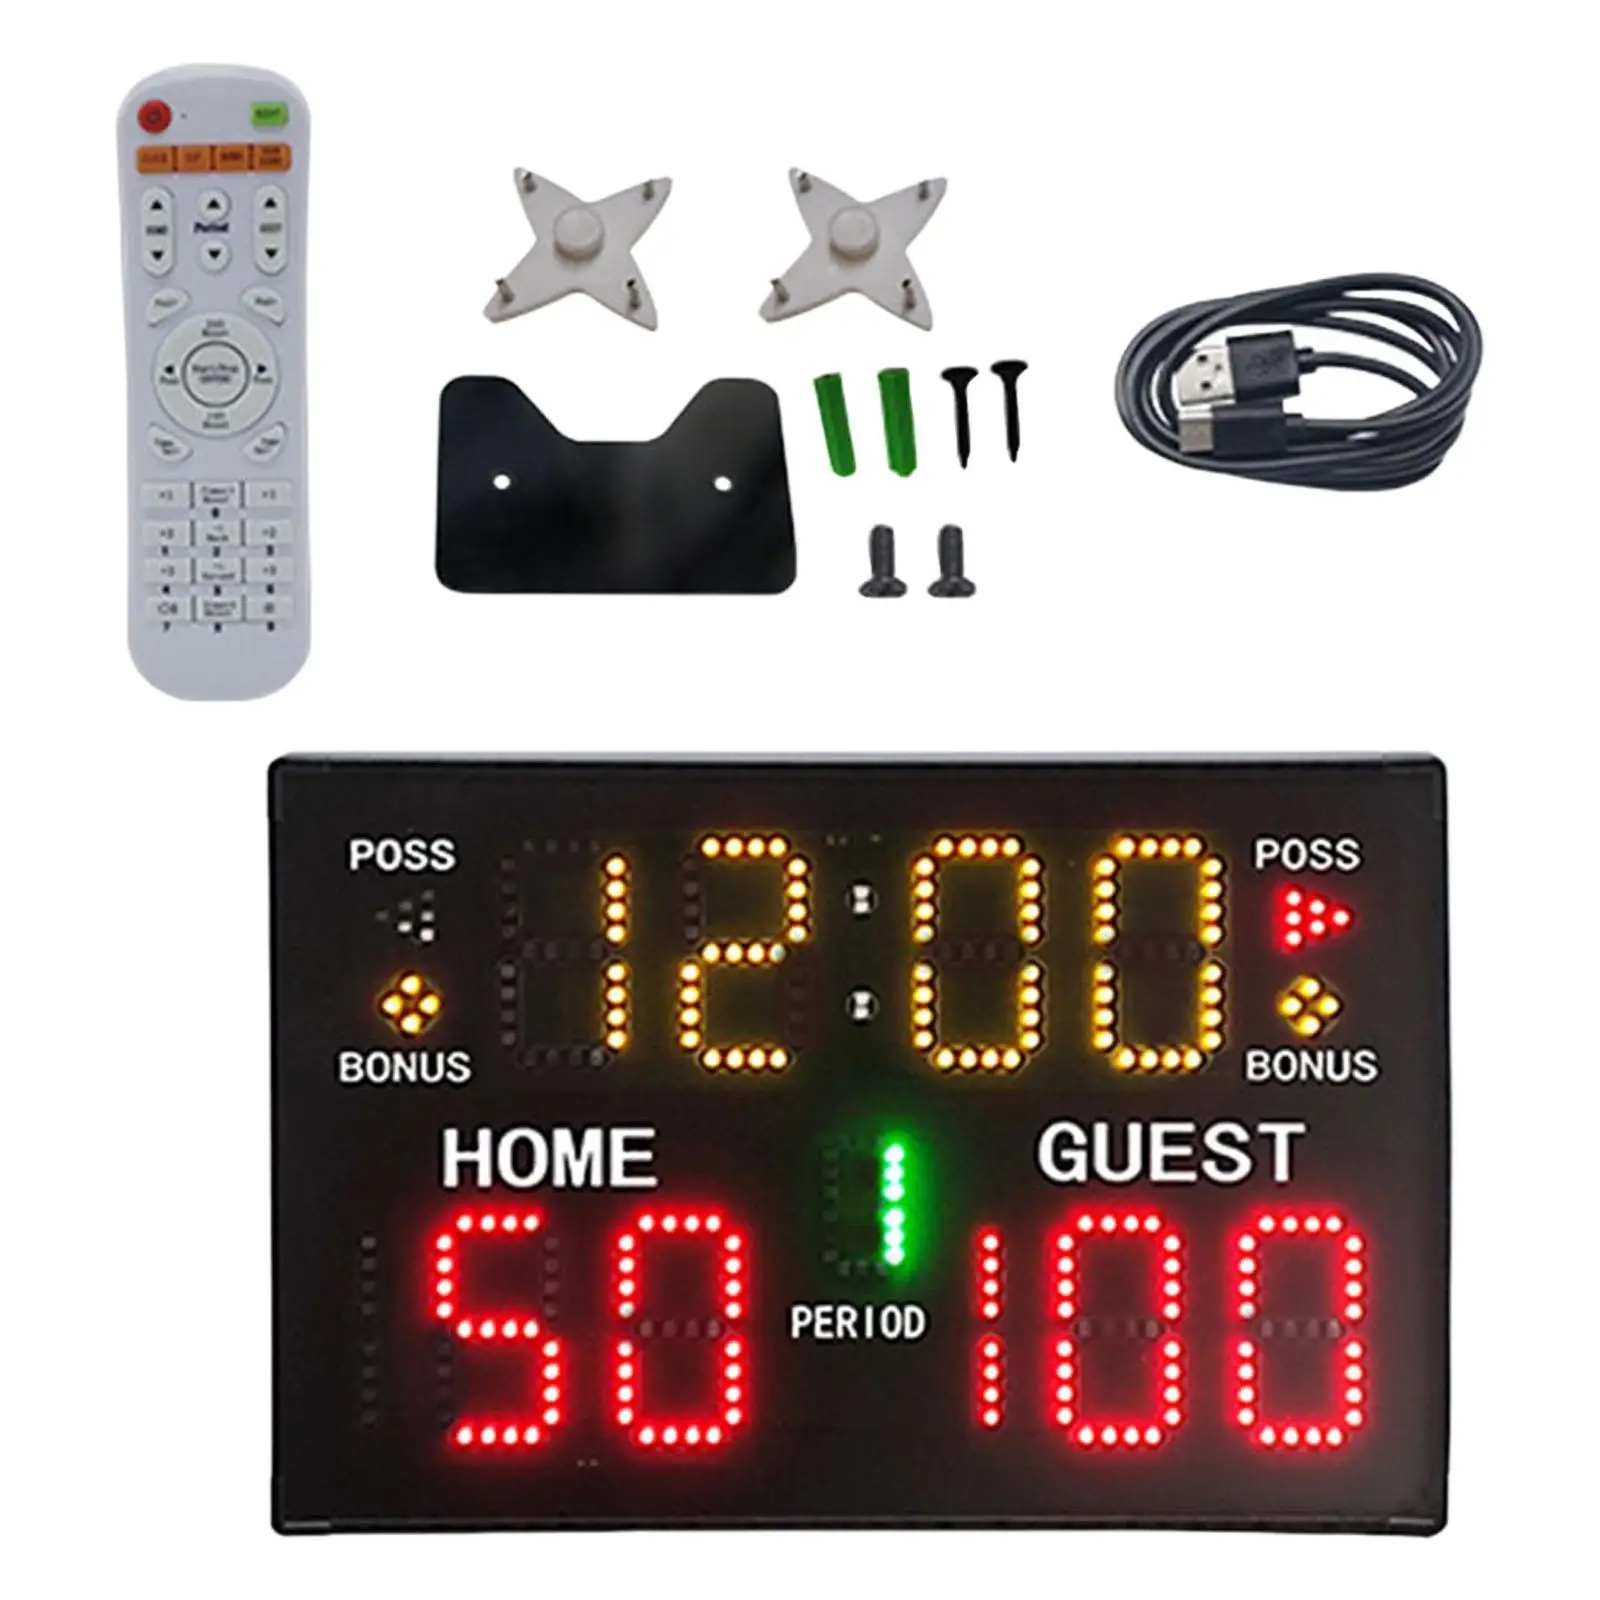 Digital Scoreboard Score Keeper Wall Mounted Battery Operated with Remote Electronic Scoreboard for Tennis Outdoor Boxing